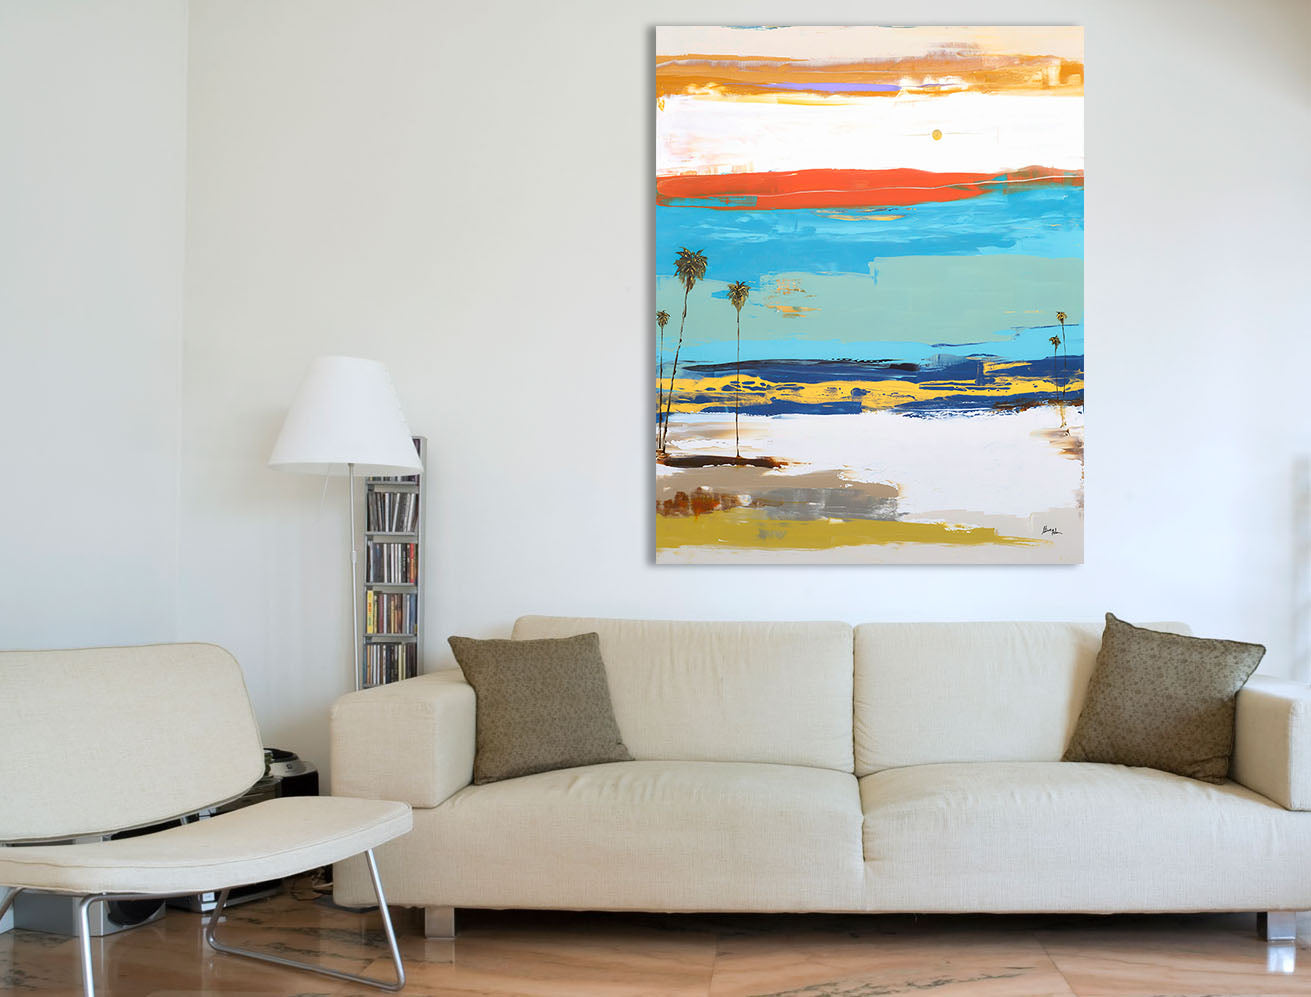 Abstract Art in Modern Interior